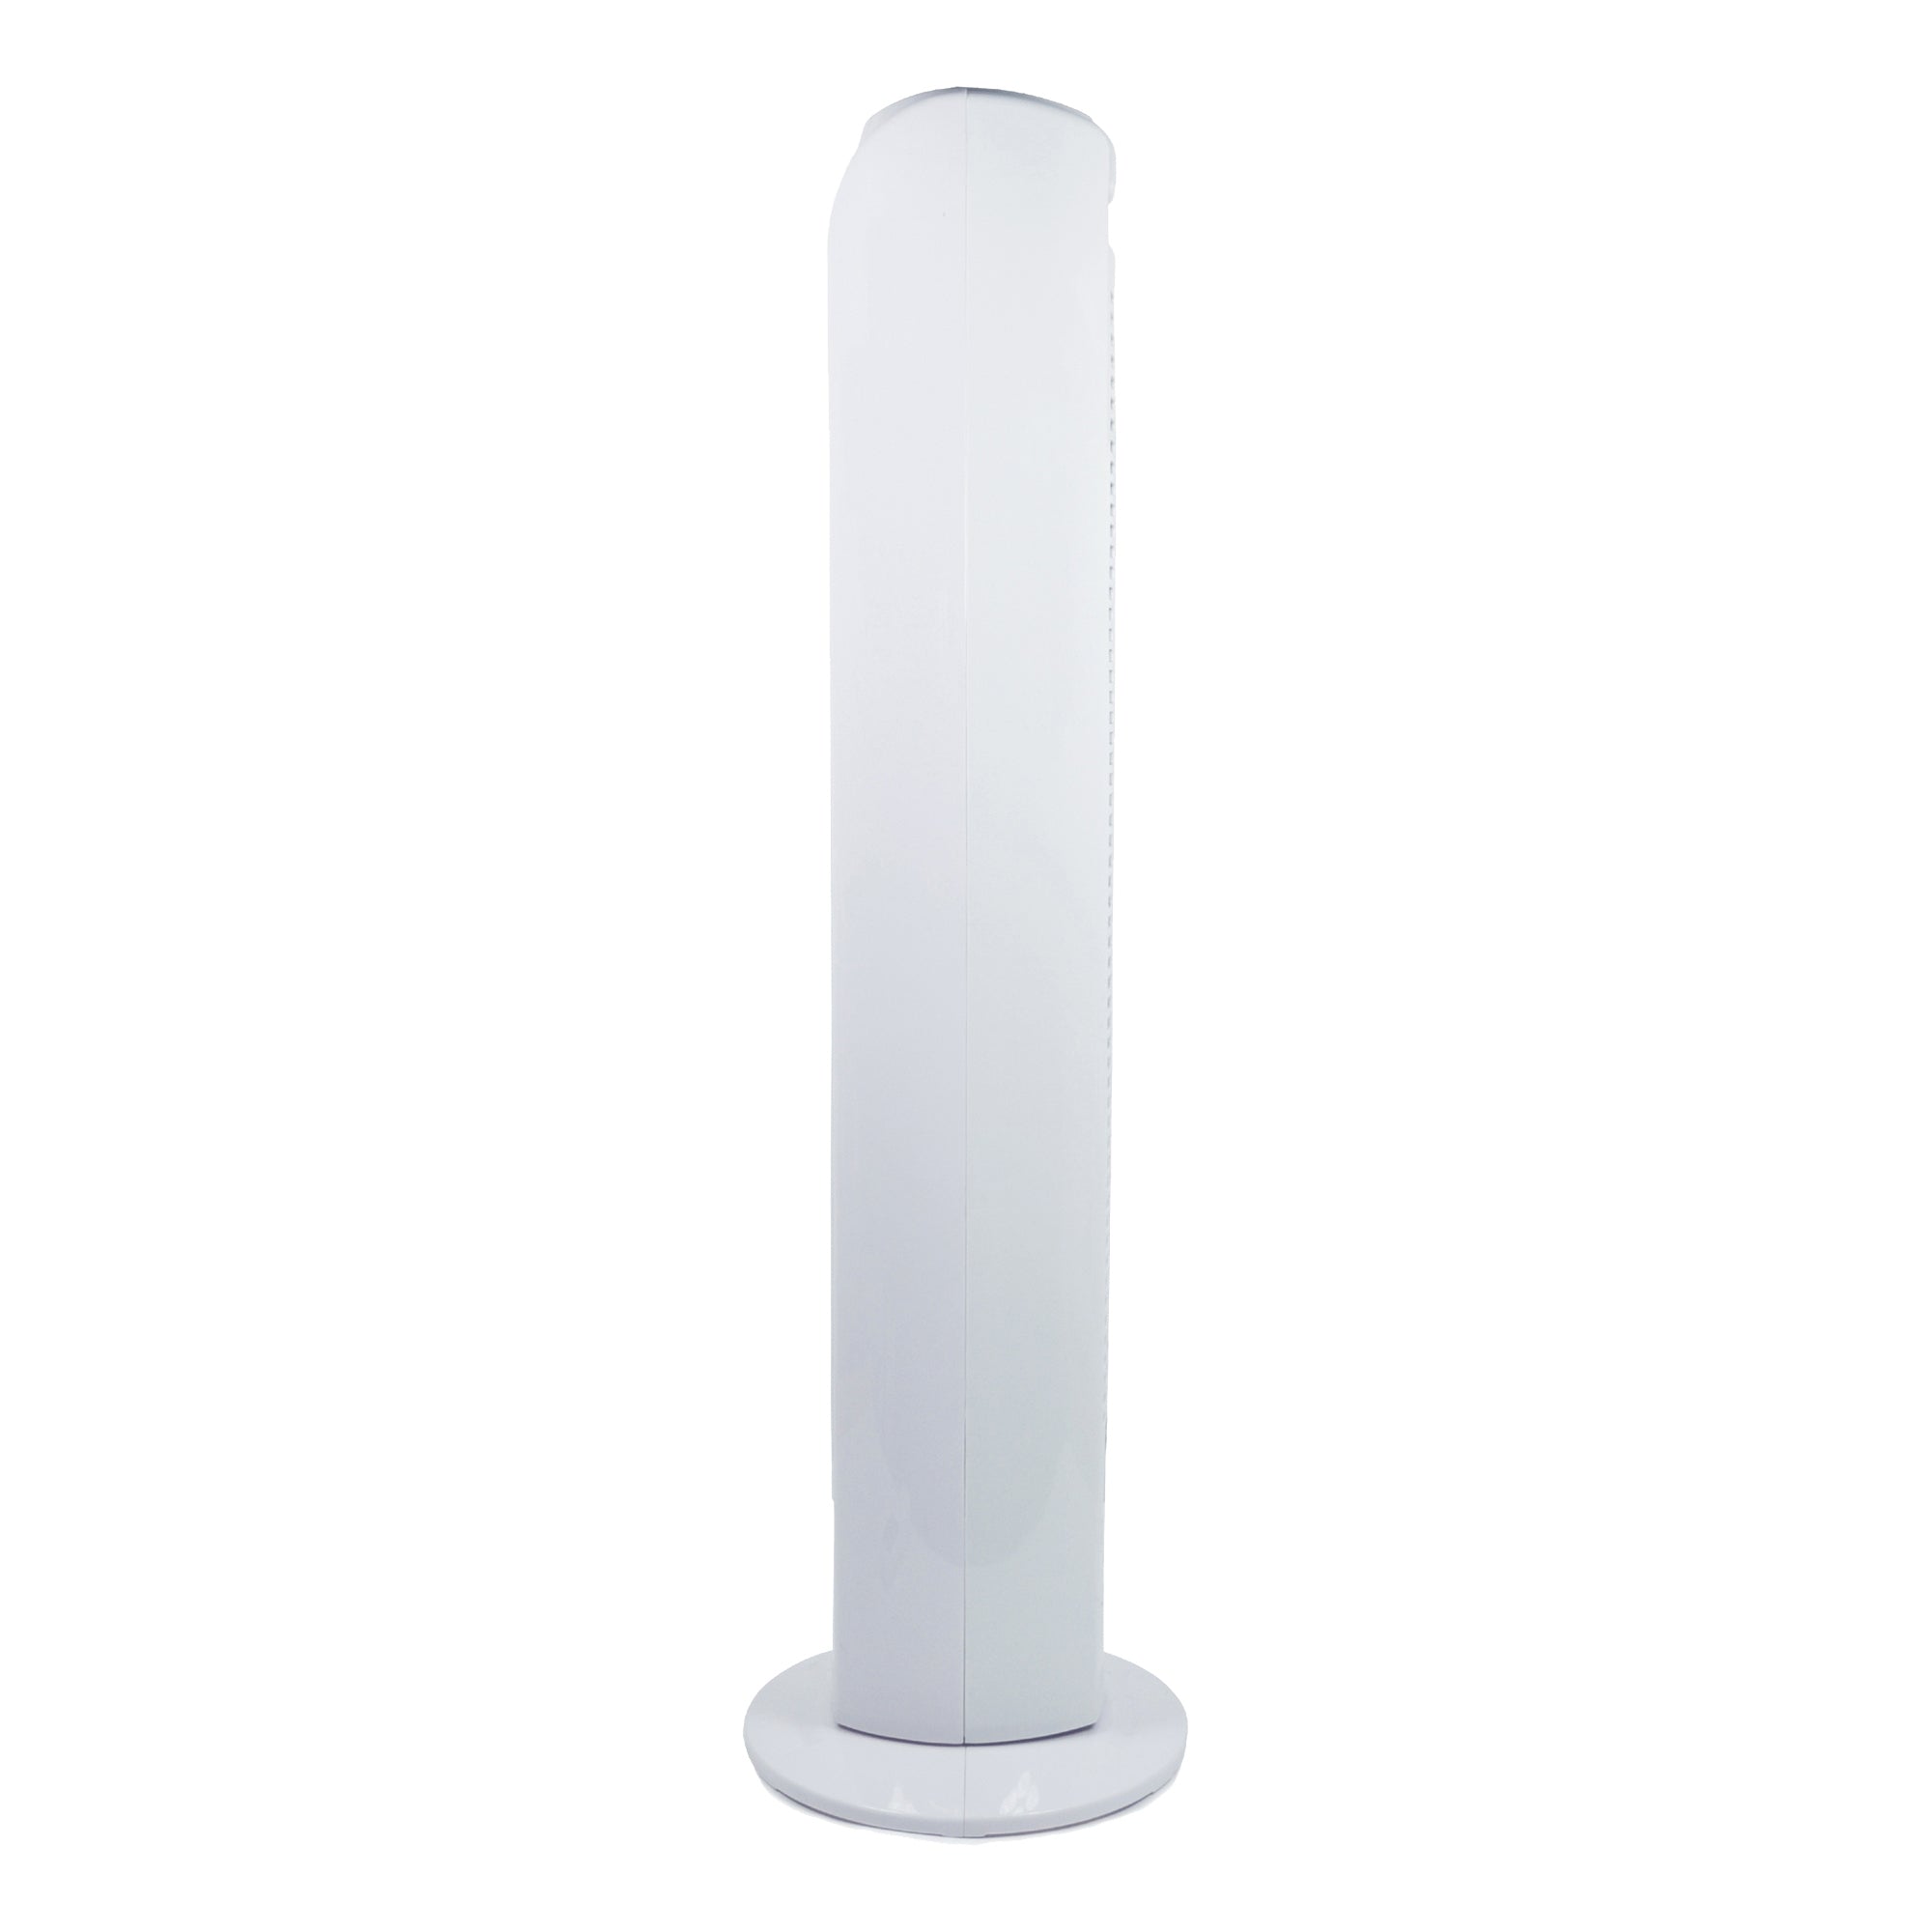 Tower Fan, Oscillating, 7.5 Hour Timer, 29 Inch, White